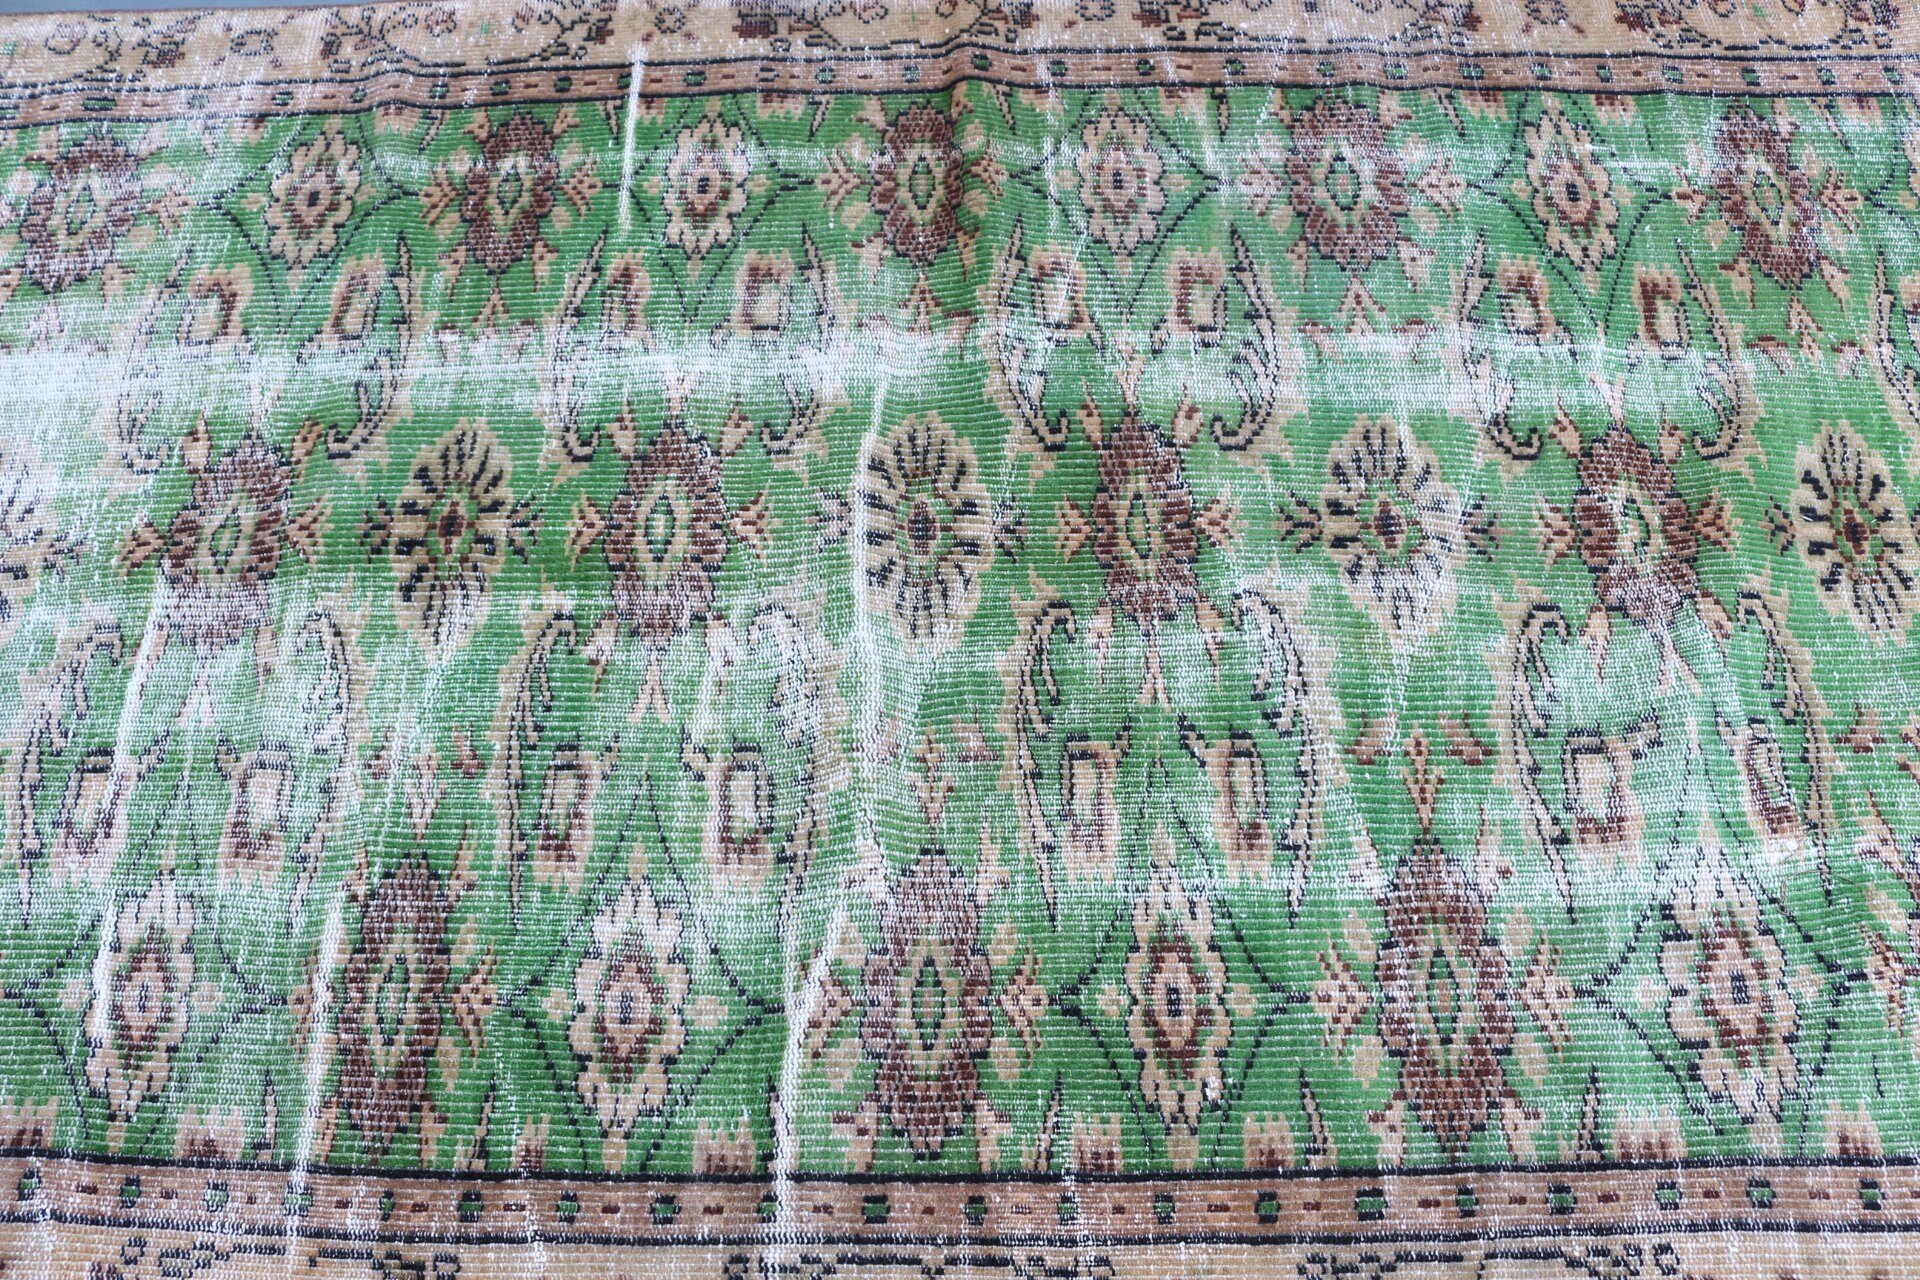 Rugs for Dining Room, Moroccan Rug, Retro Rug, Kitchen Rug, Green Bedroom Rugs, Vintage Rug, 4.4x7.7 ft Area Rugs, Turkish Rug, Cool Rugs